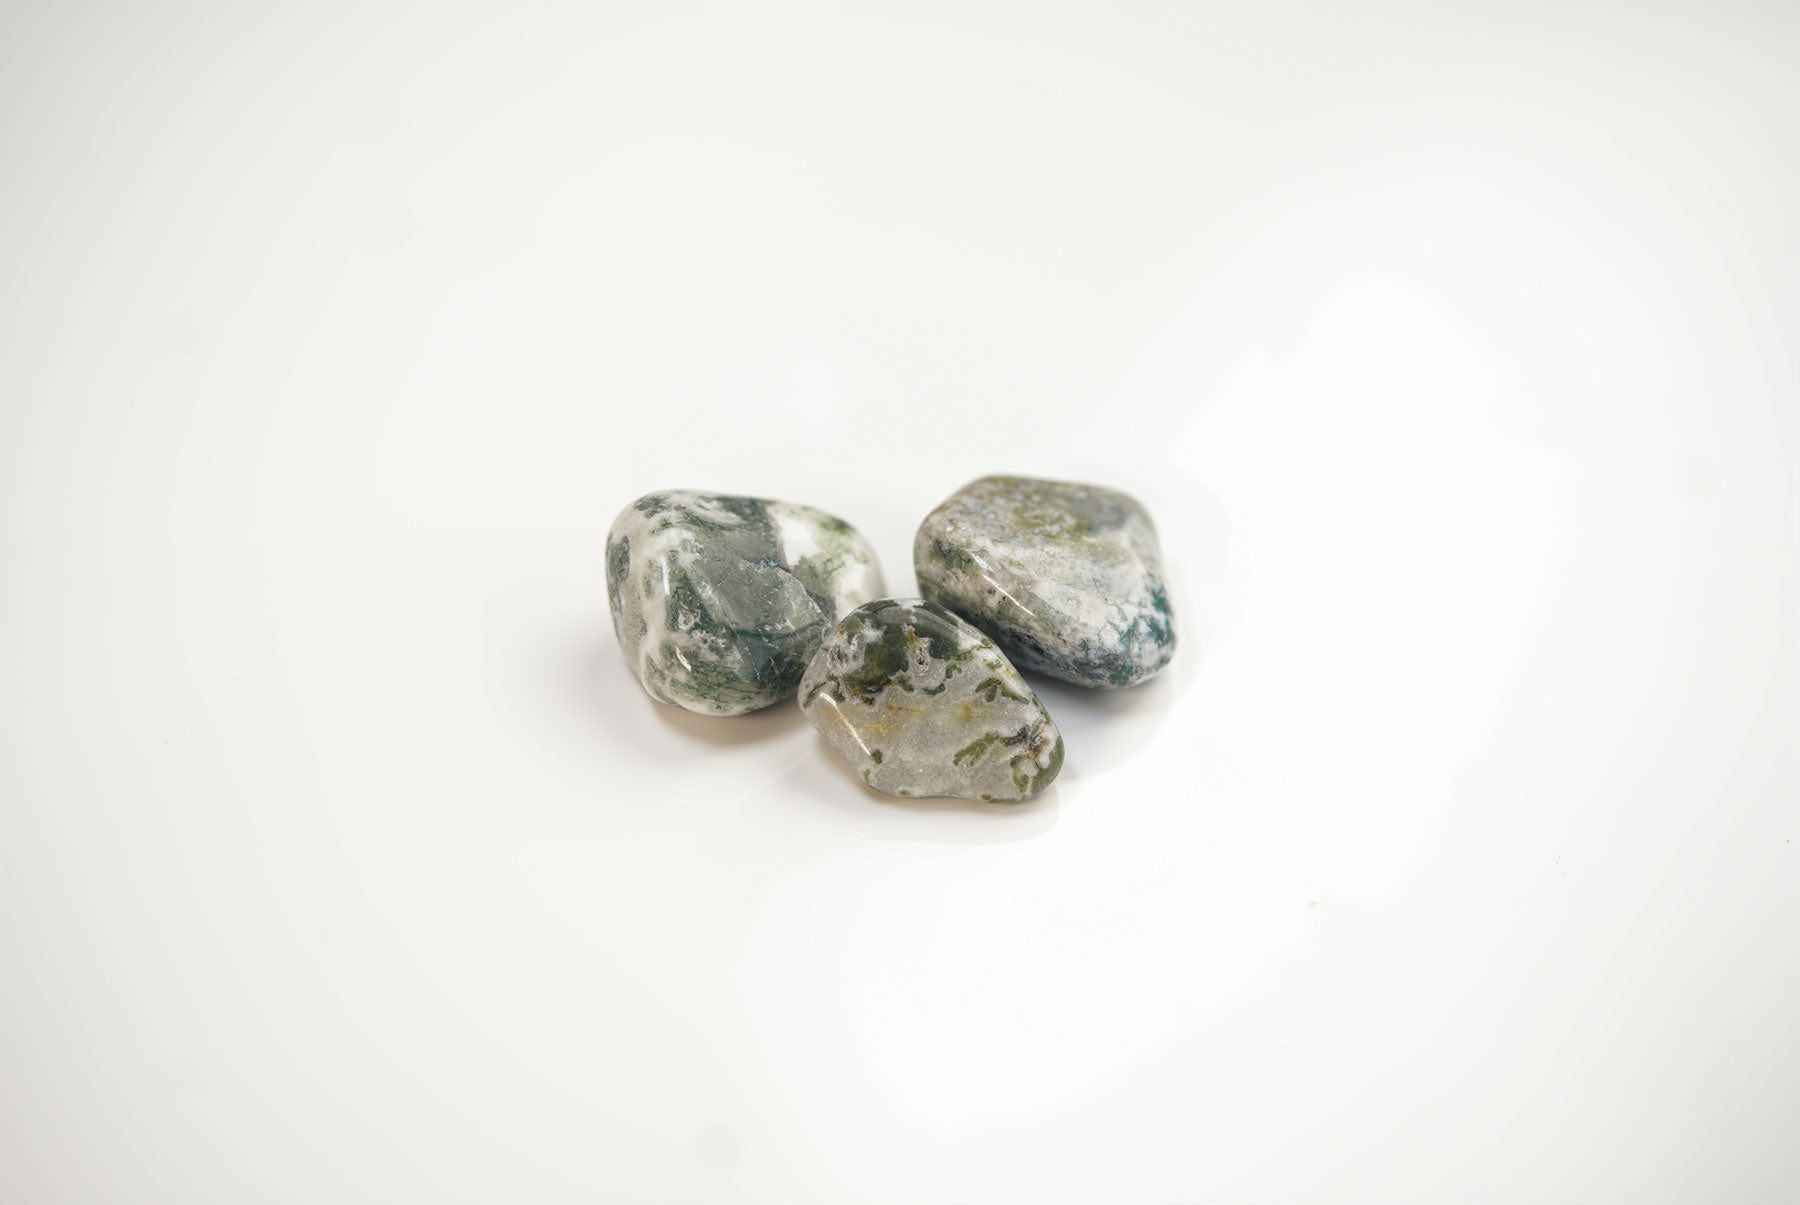 Tree Agate Tumble Stones: Harness the Grounding Energy of Nature